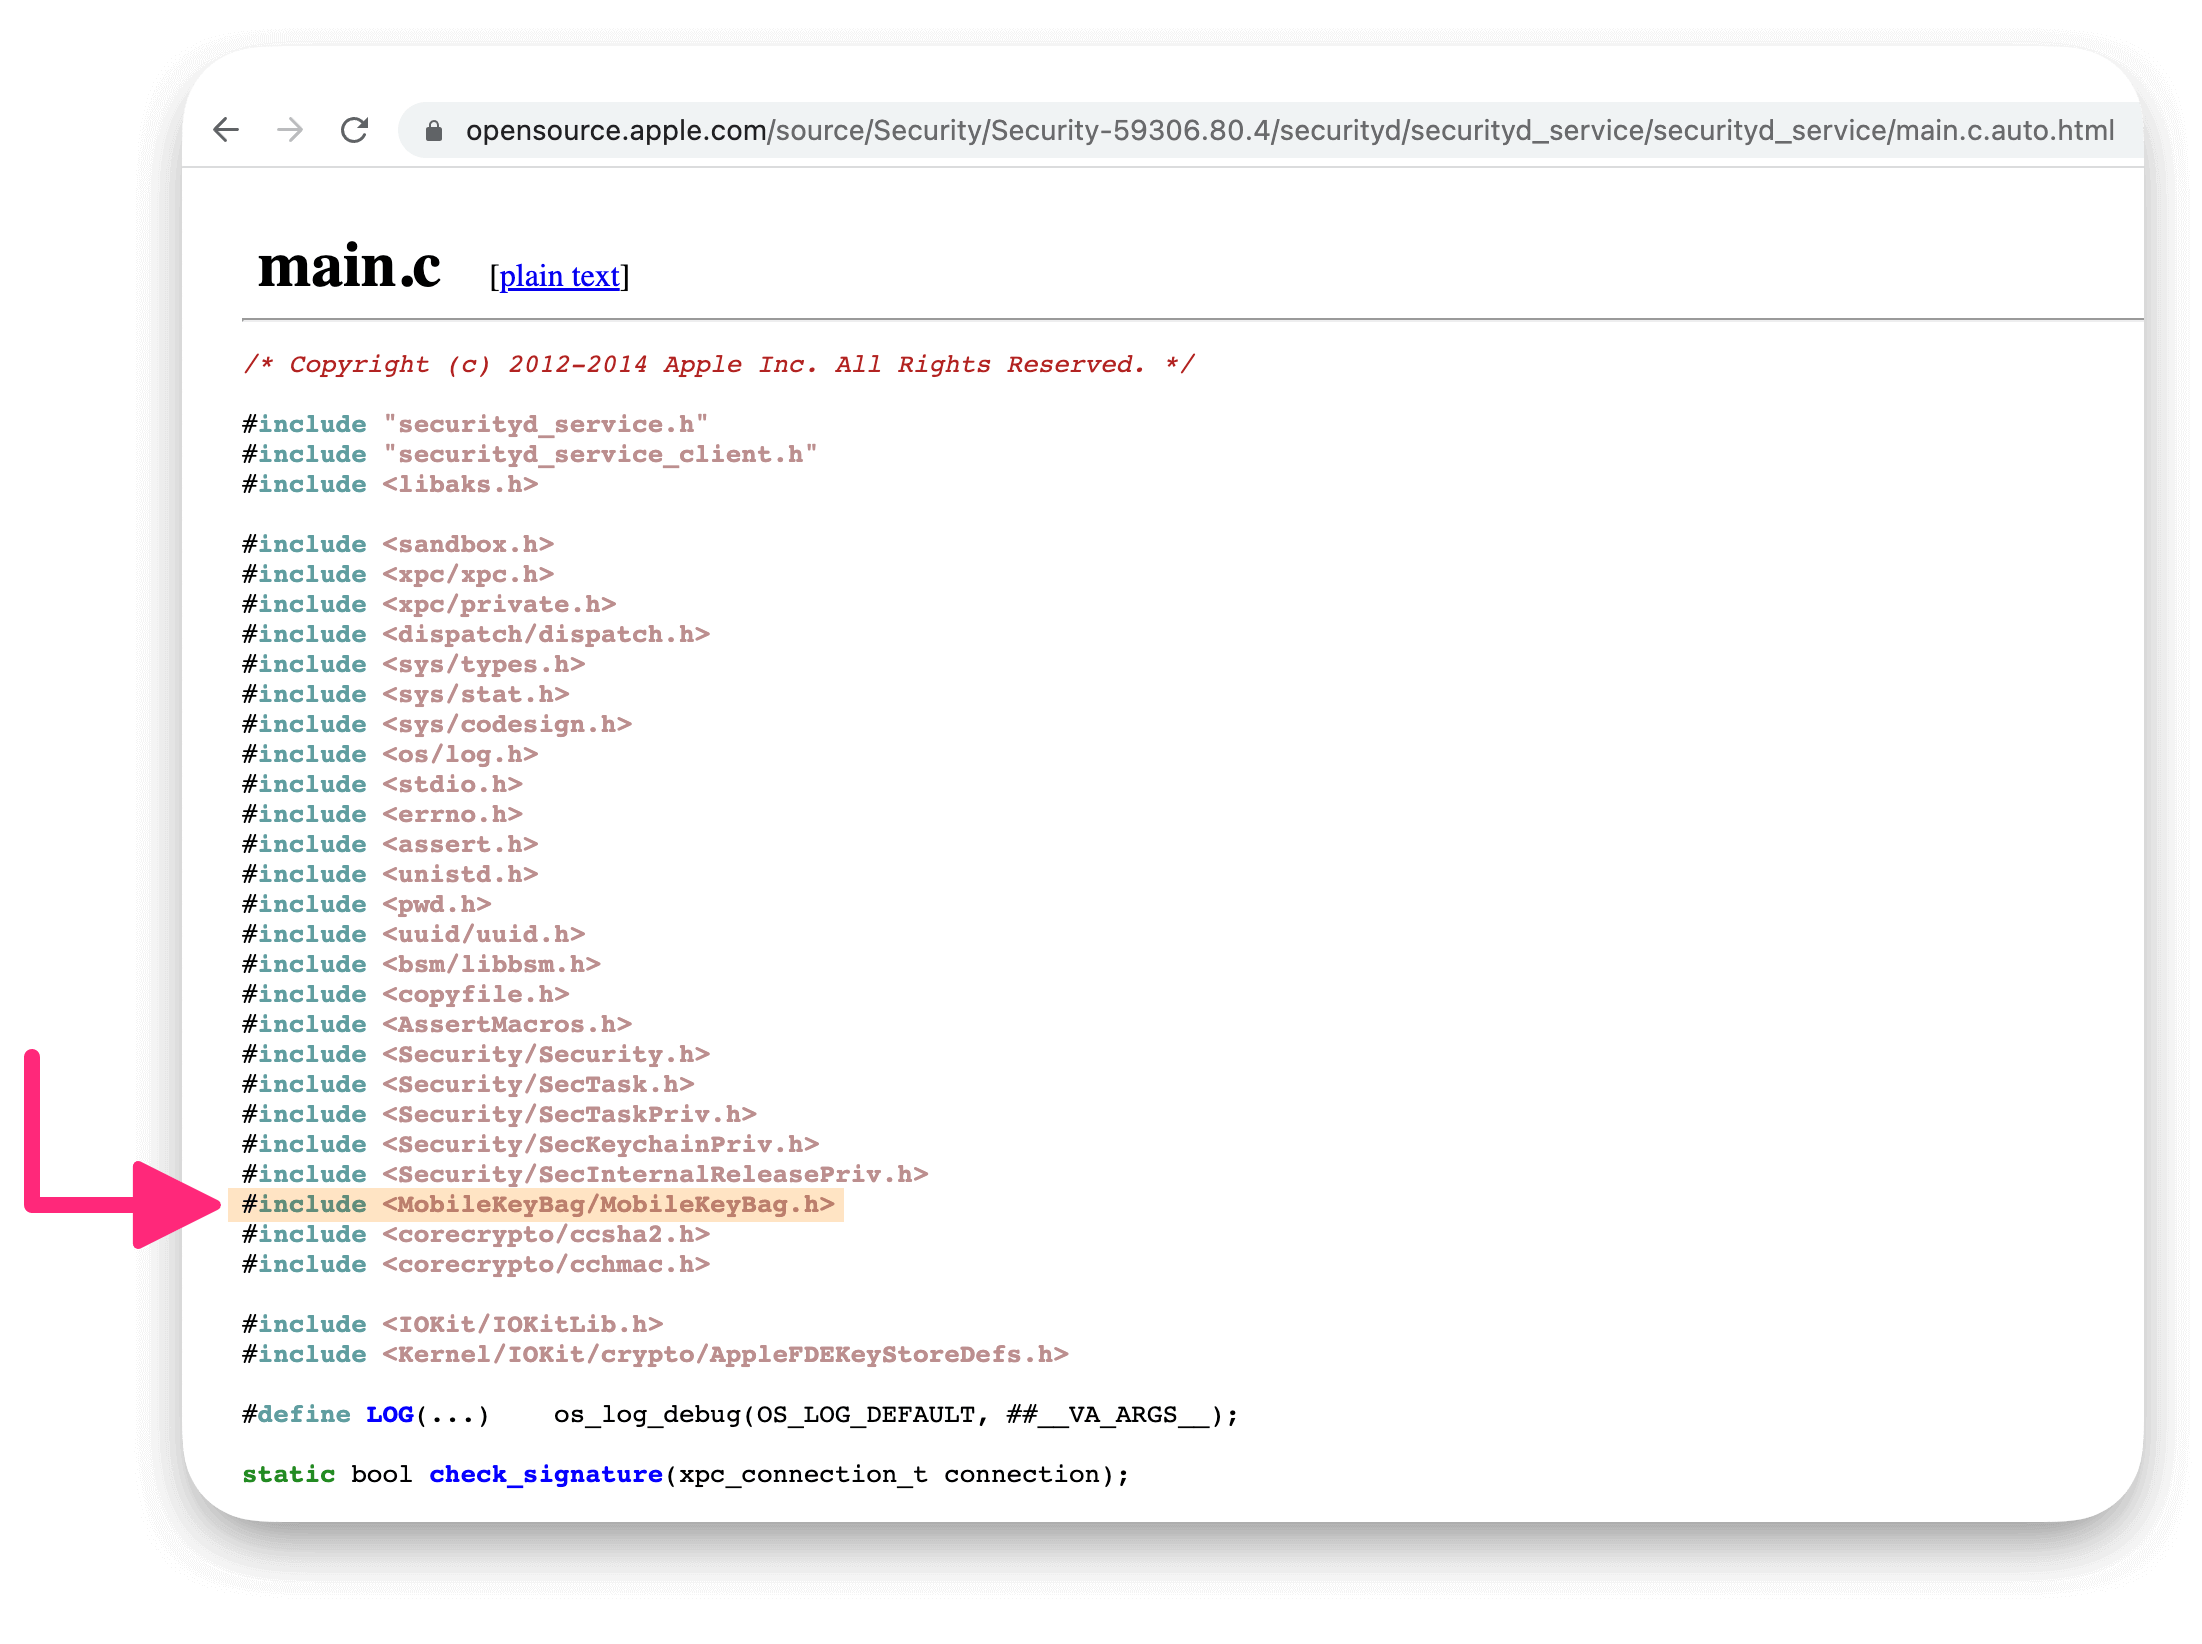 A screenshot of the source code for the main.c file of the securityd_service with the line "#include <MobileKeyBag/MobileKeyBag.h" highlighted